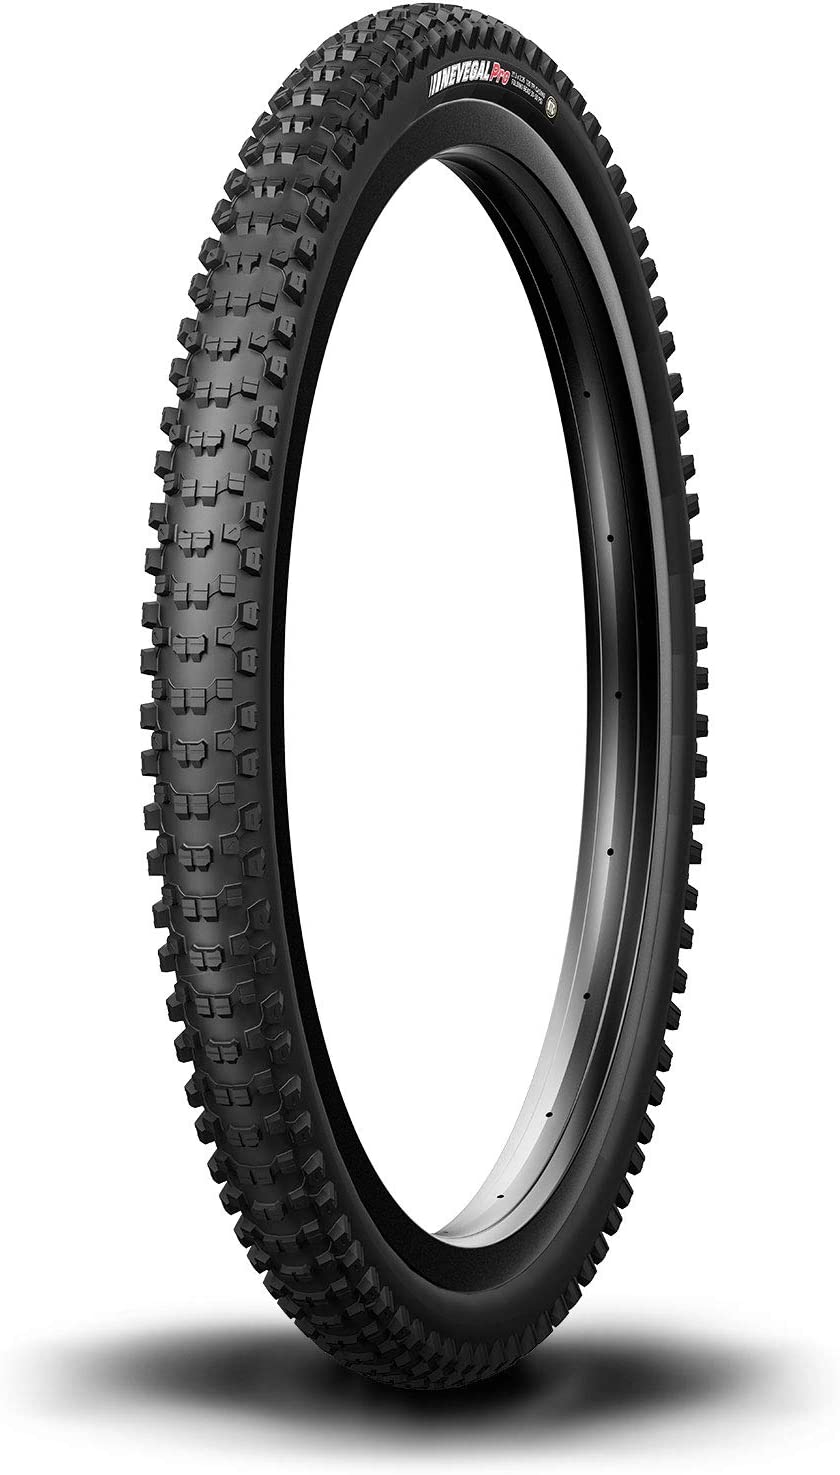 Kenda Nevegal Pro Folding Tire - 26 x 2.1 - Downtown Bicycle Works 